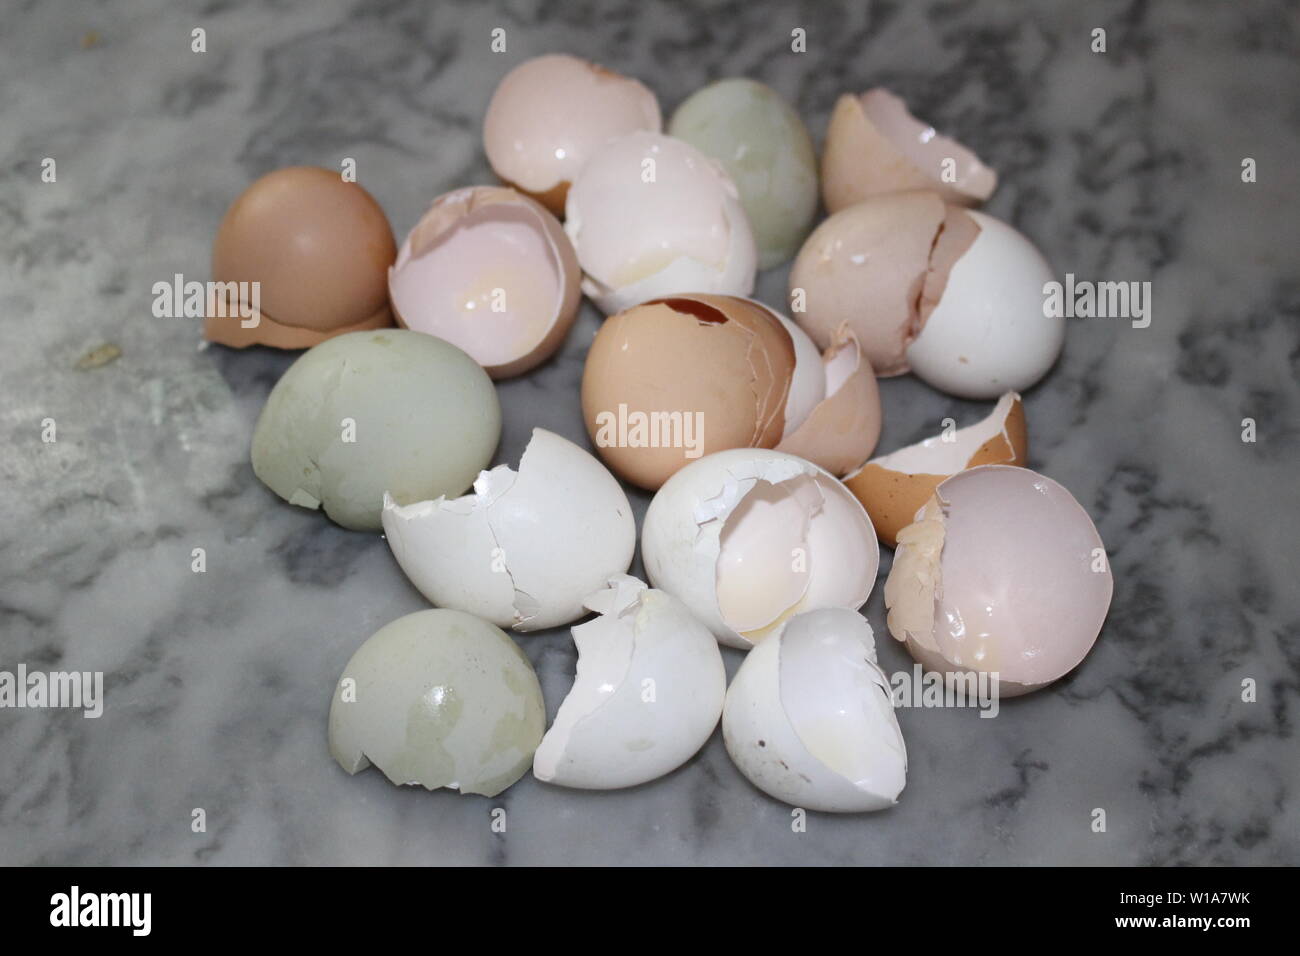 Tinted eggshells from several different chicken breeds like Araucana,  Black Australorp, Polish, Speckled Sussex, Barred Rock and other breeds. Stock Photo